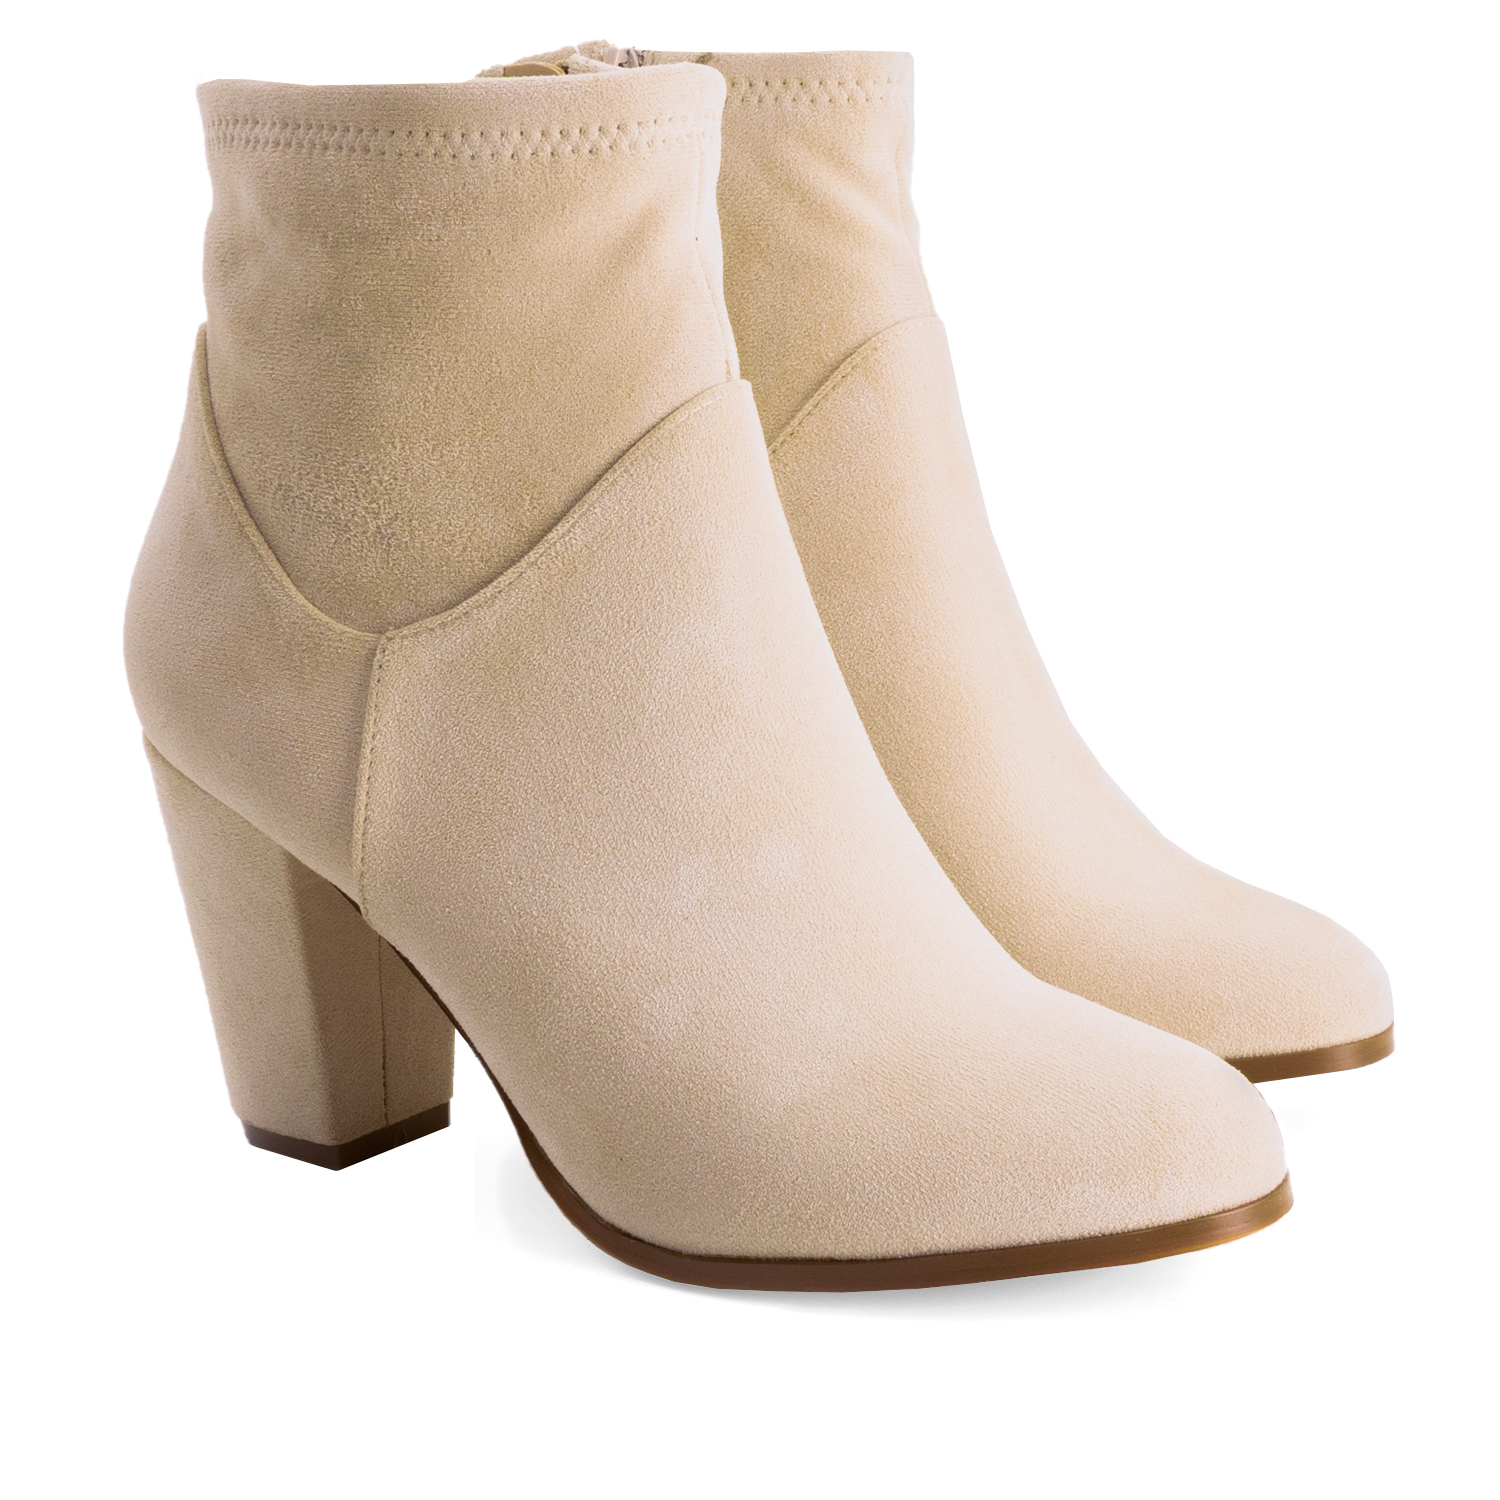 Heeled booties in off-white faux suede 